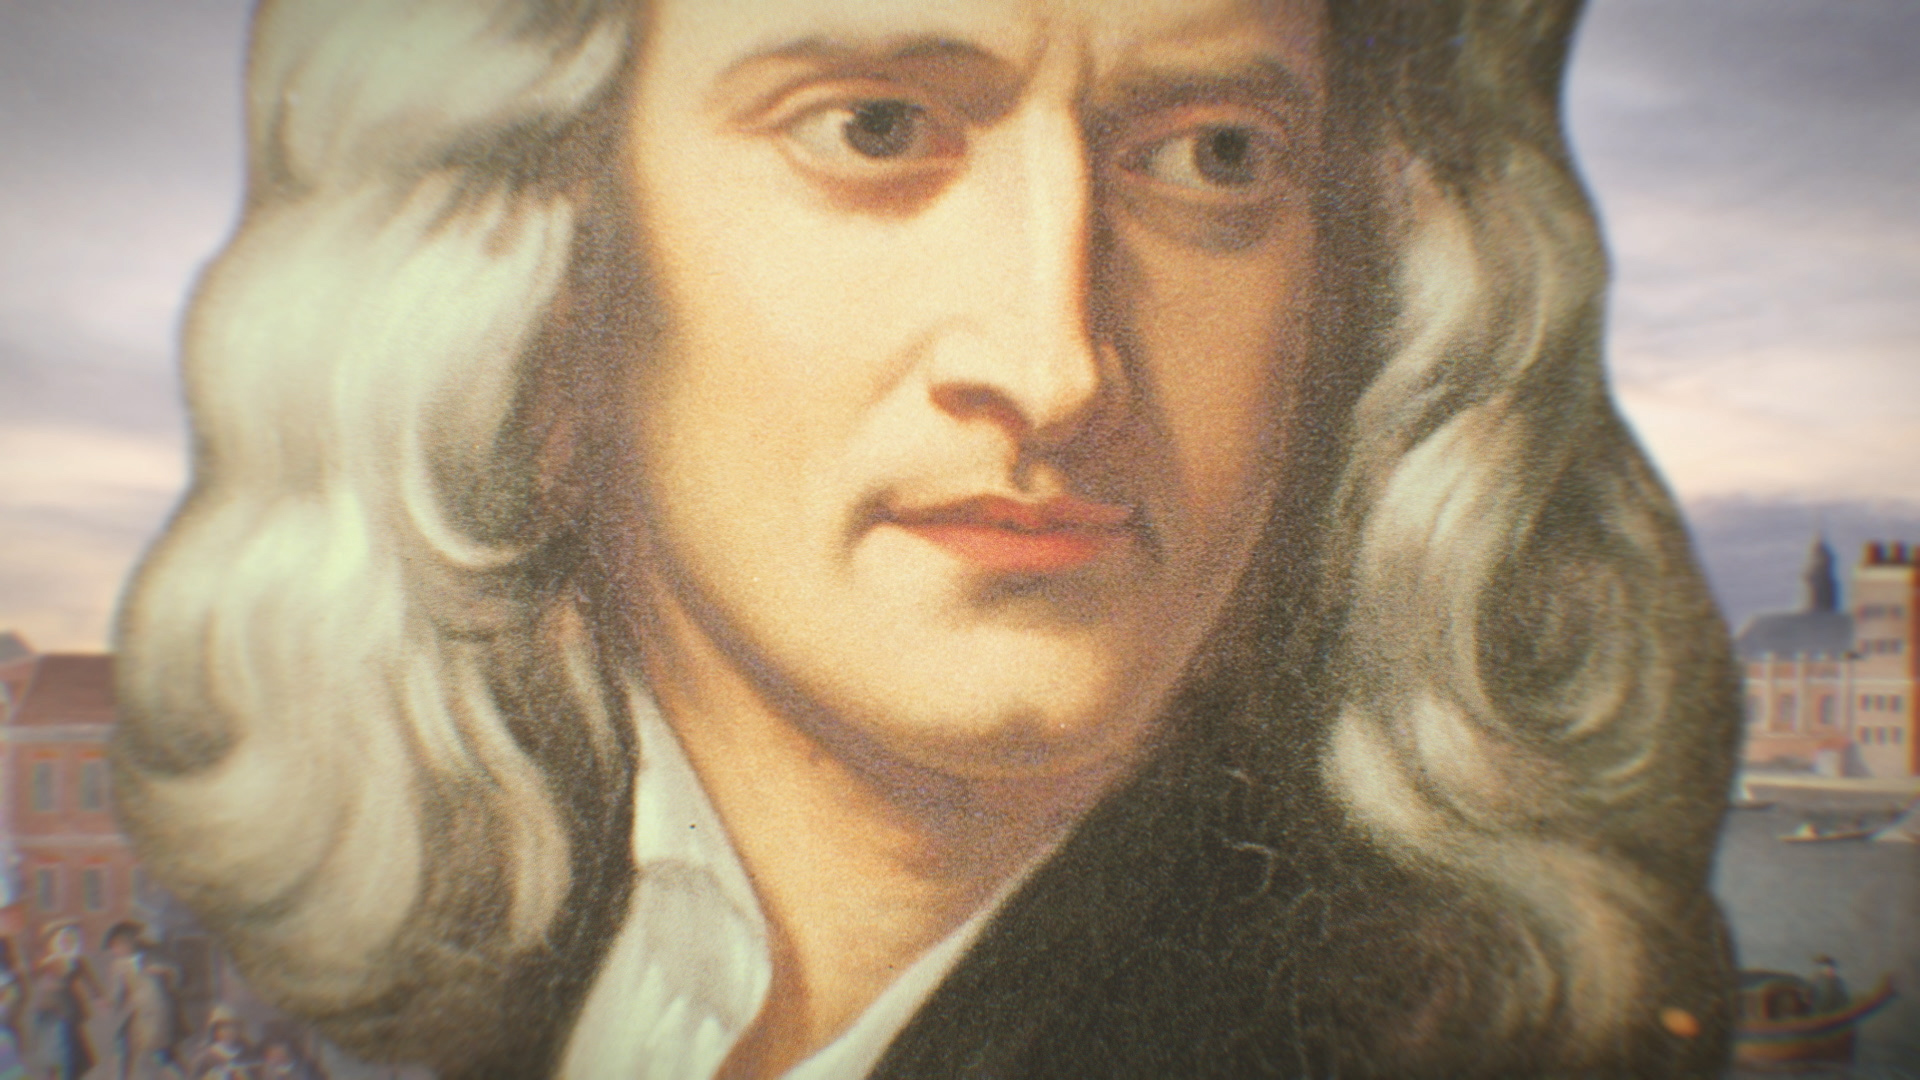 Isaac Newton - Facts, Biography & Laws